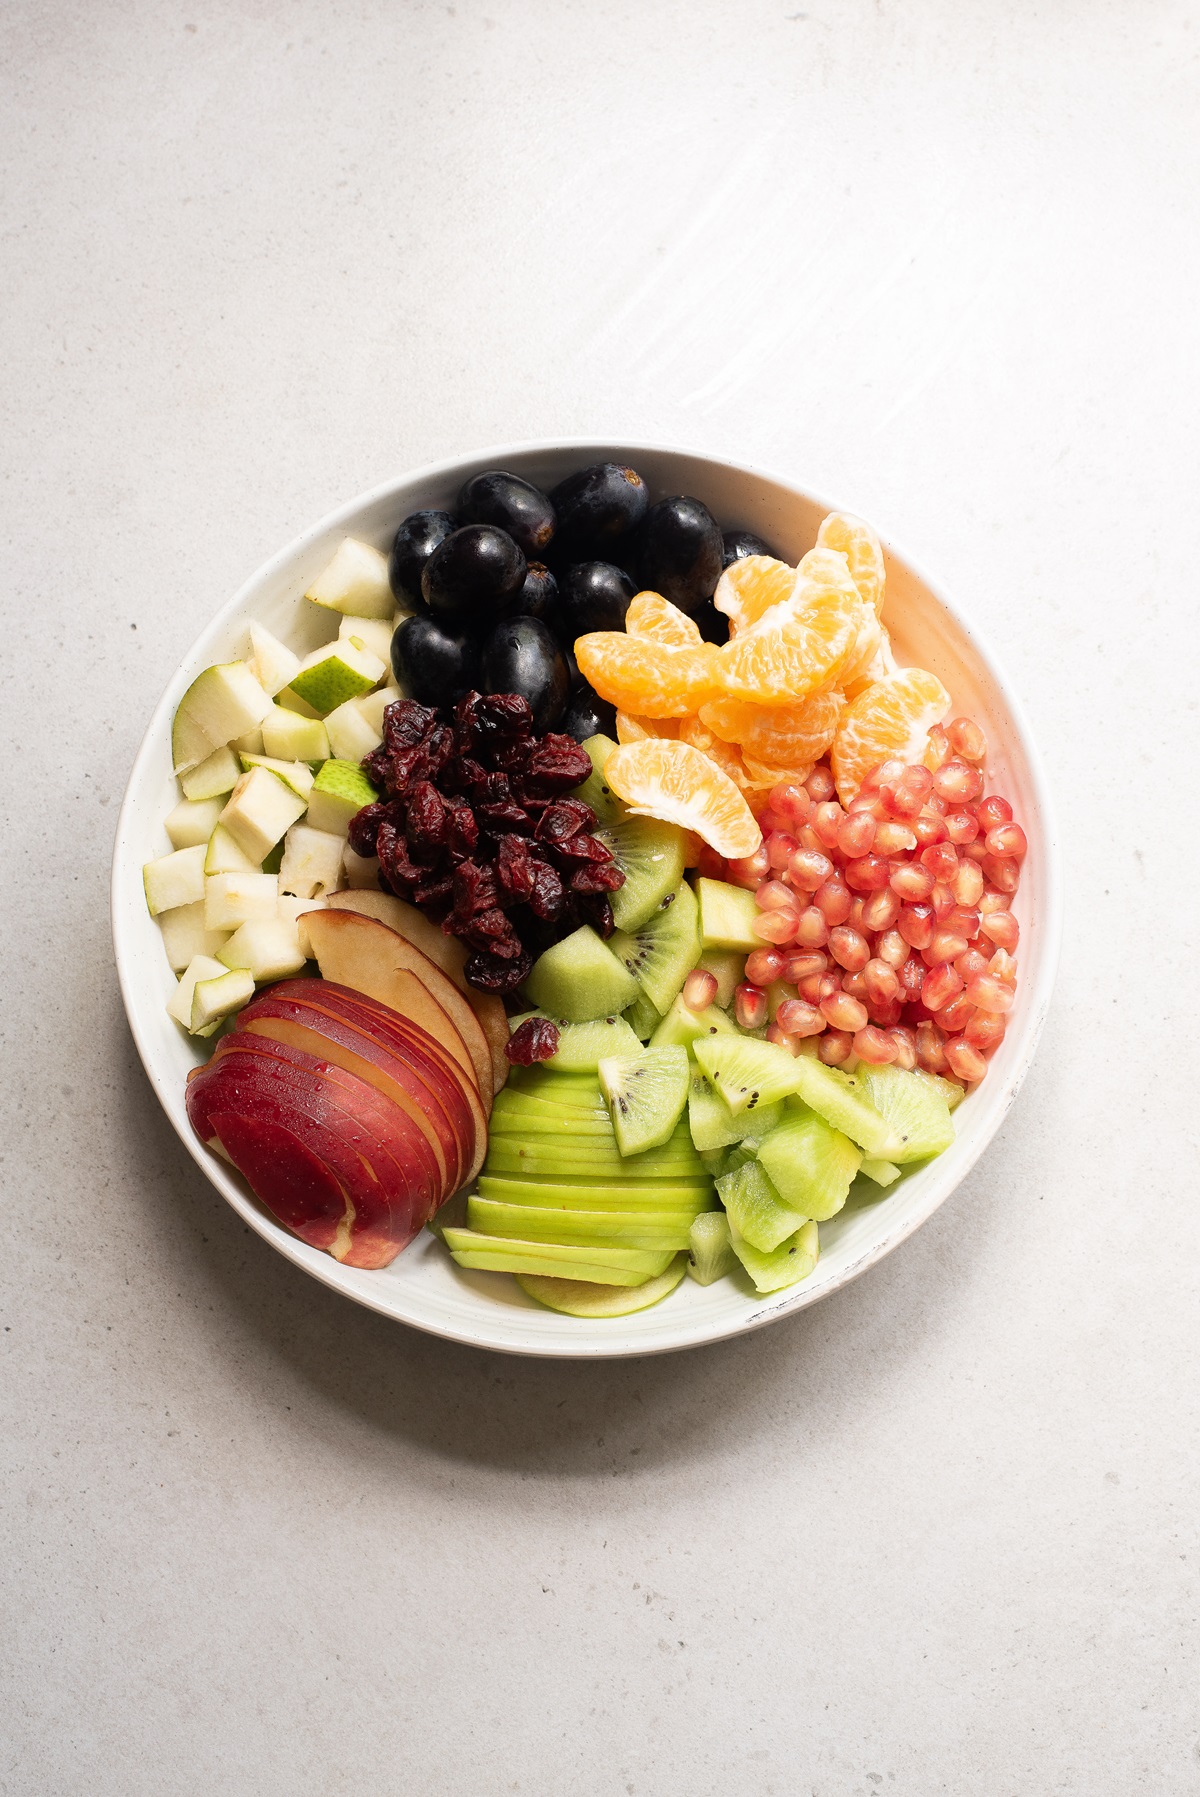 Fruit sliced or diced on a white plate.